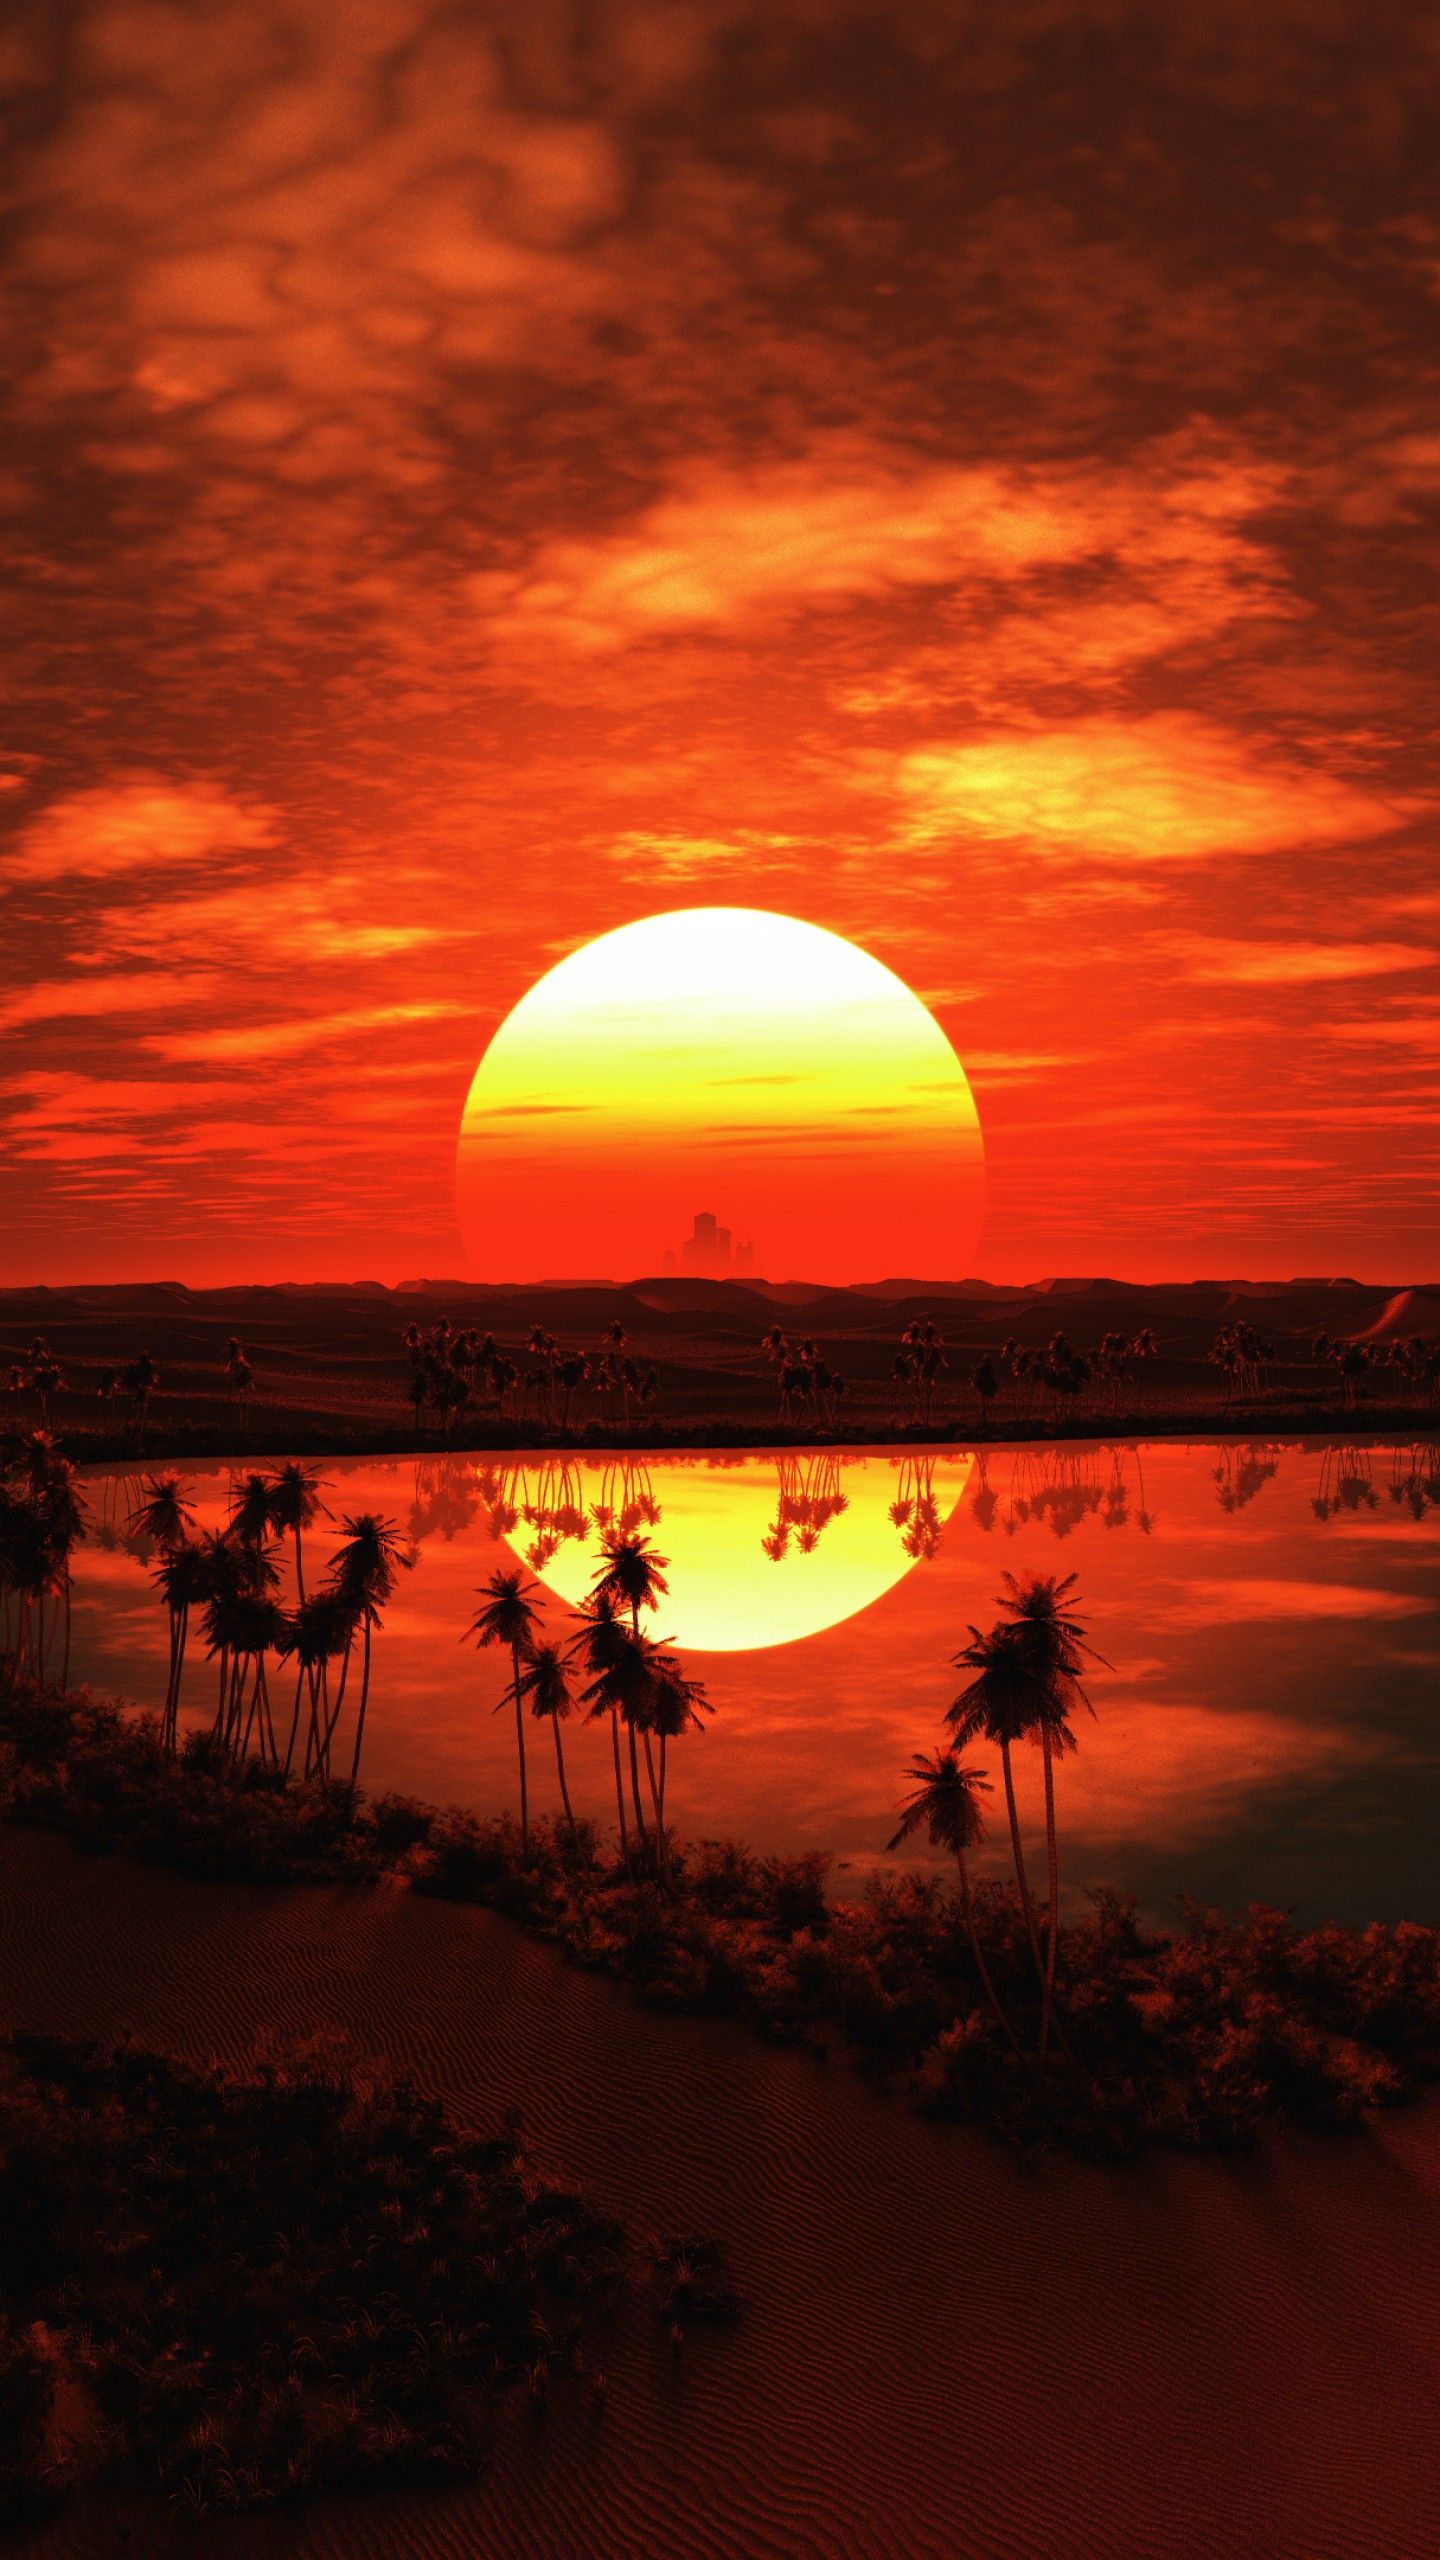 Wallpaper Sunset, Tropical, Red, 4K, Nature / Editor's Picks,. Wallpaper for iPhone, Android, Mobile and Desktop